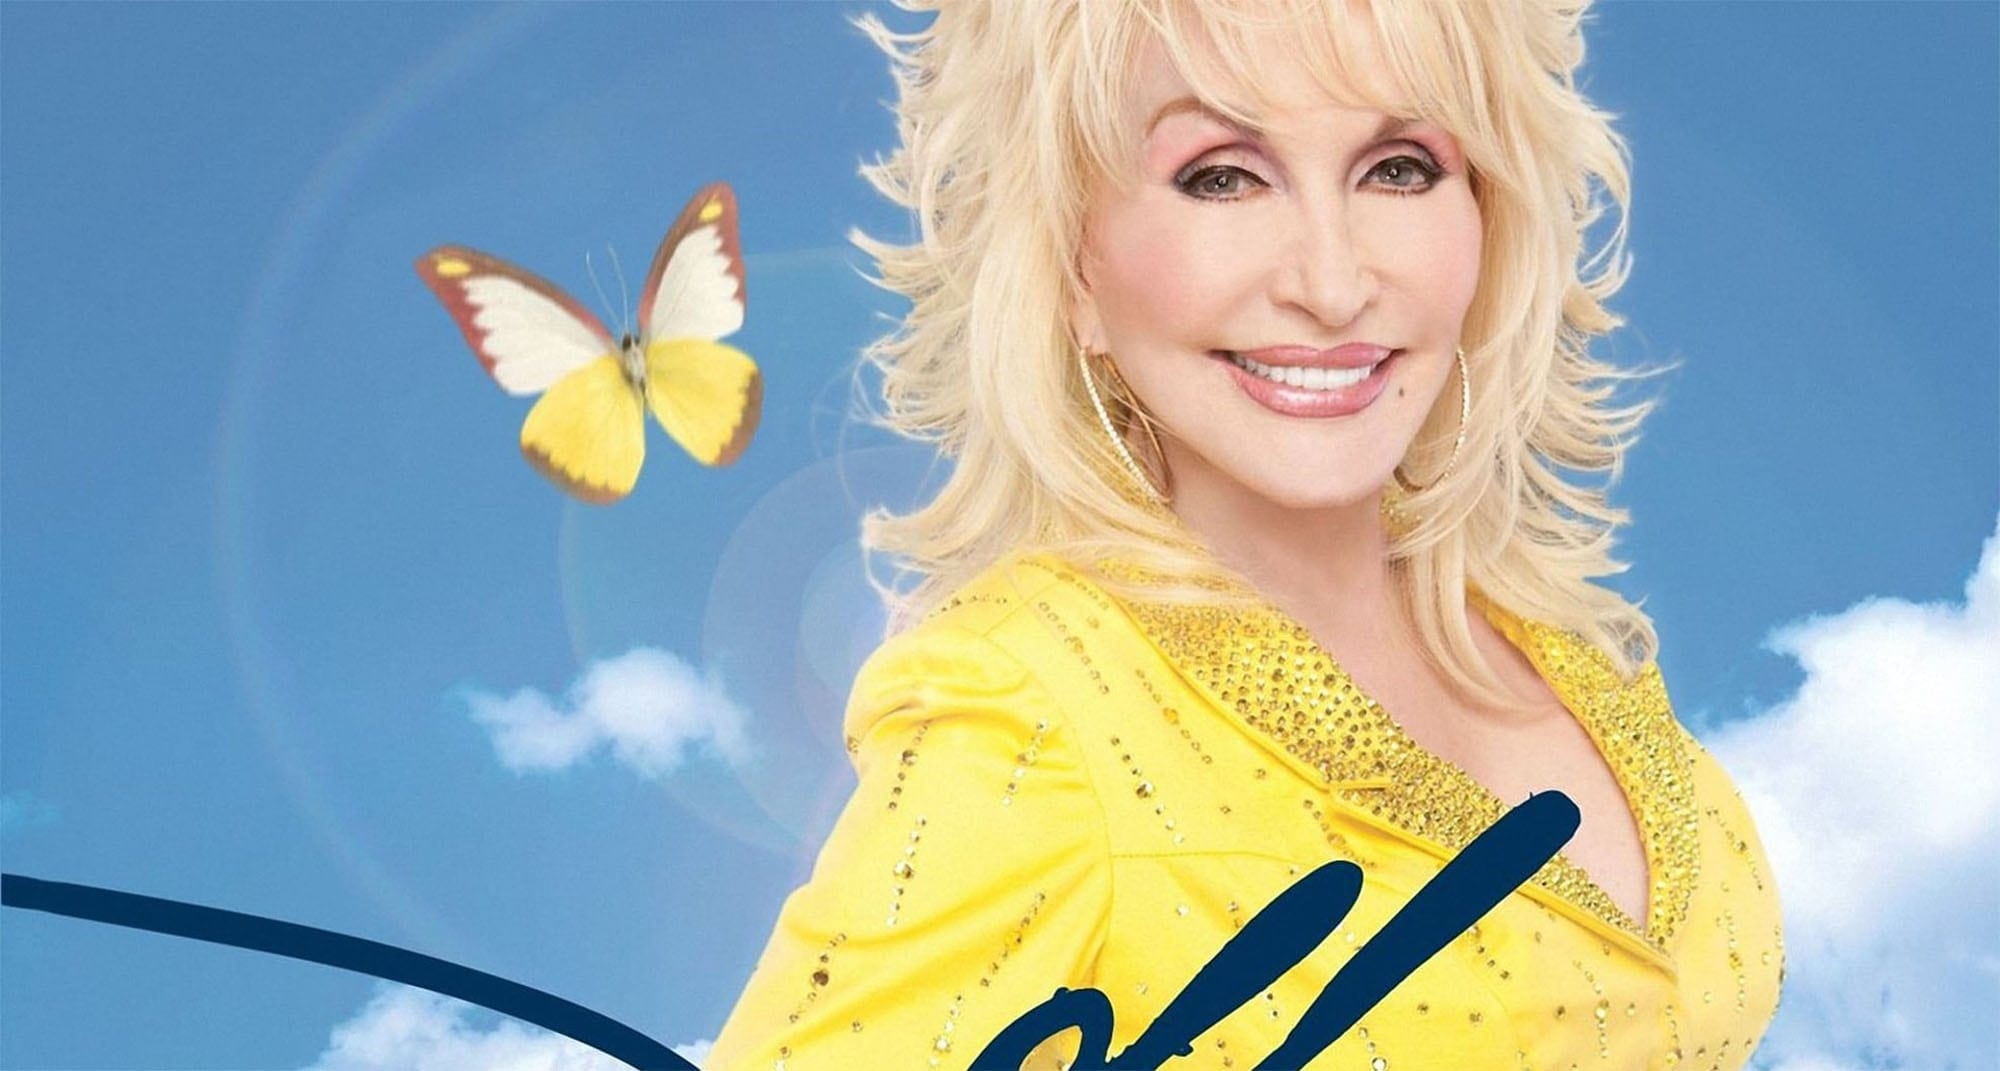 We’re huge fans of the country music legend Dolly Parton. Here’s our ranking of our six favorite performances from Parton’s dazzling acting career.